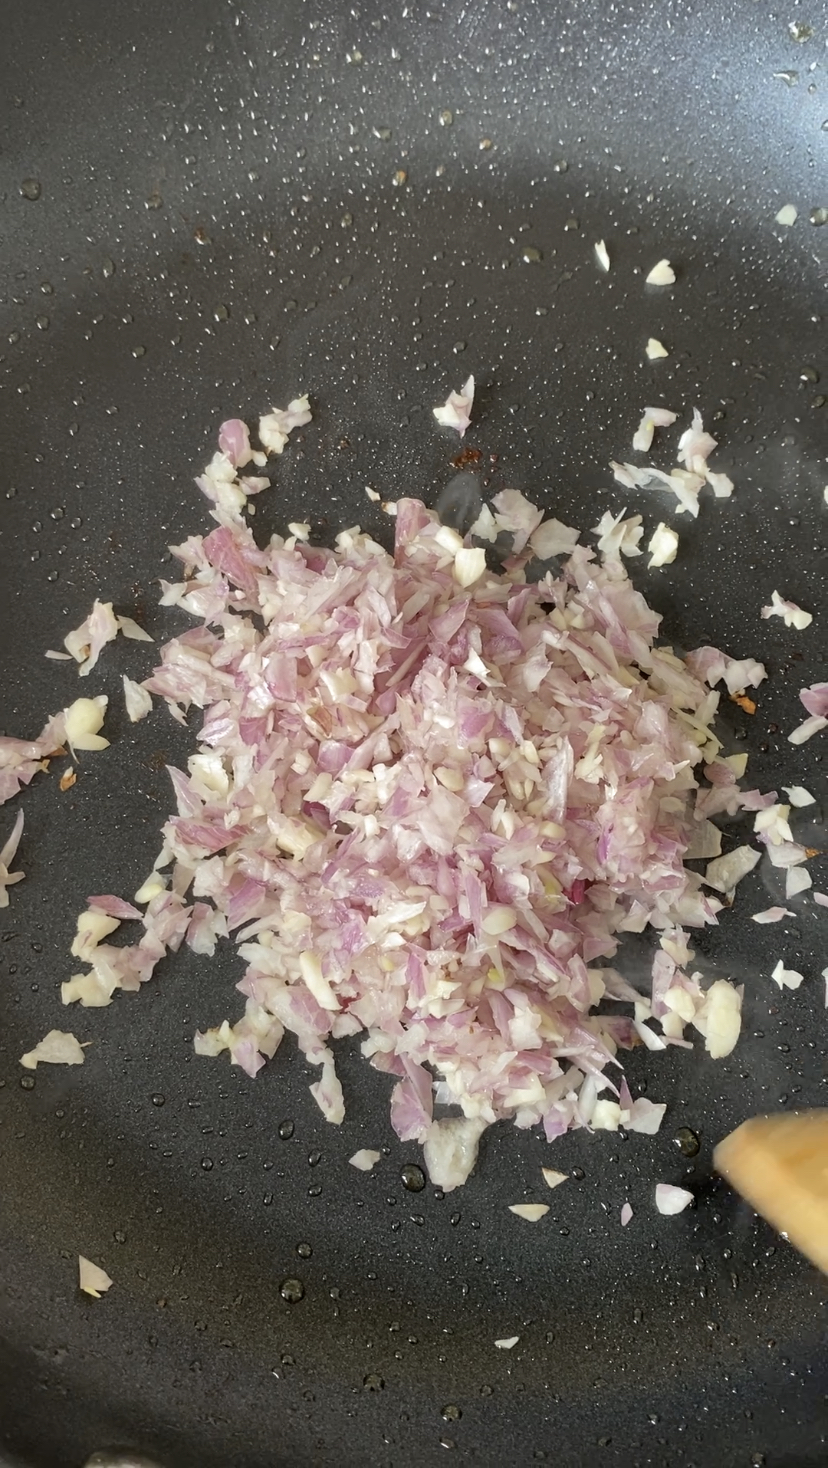 Minced shallot and garlic cooking in a skillet.